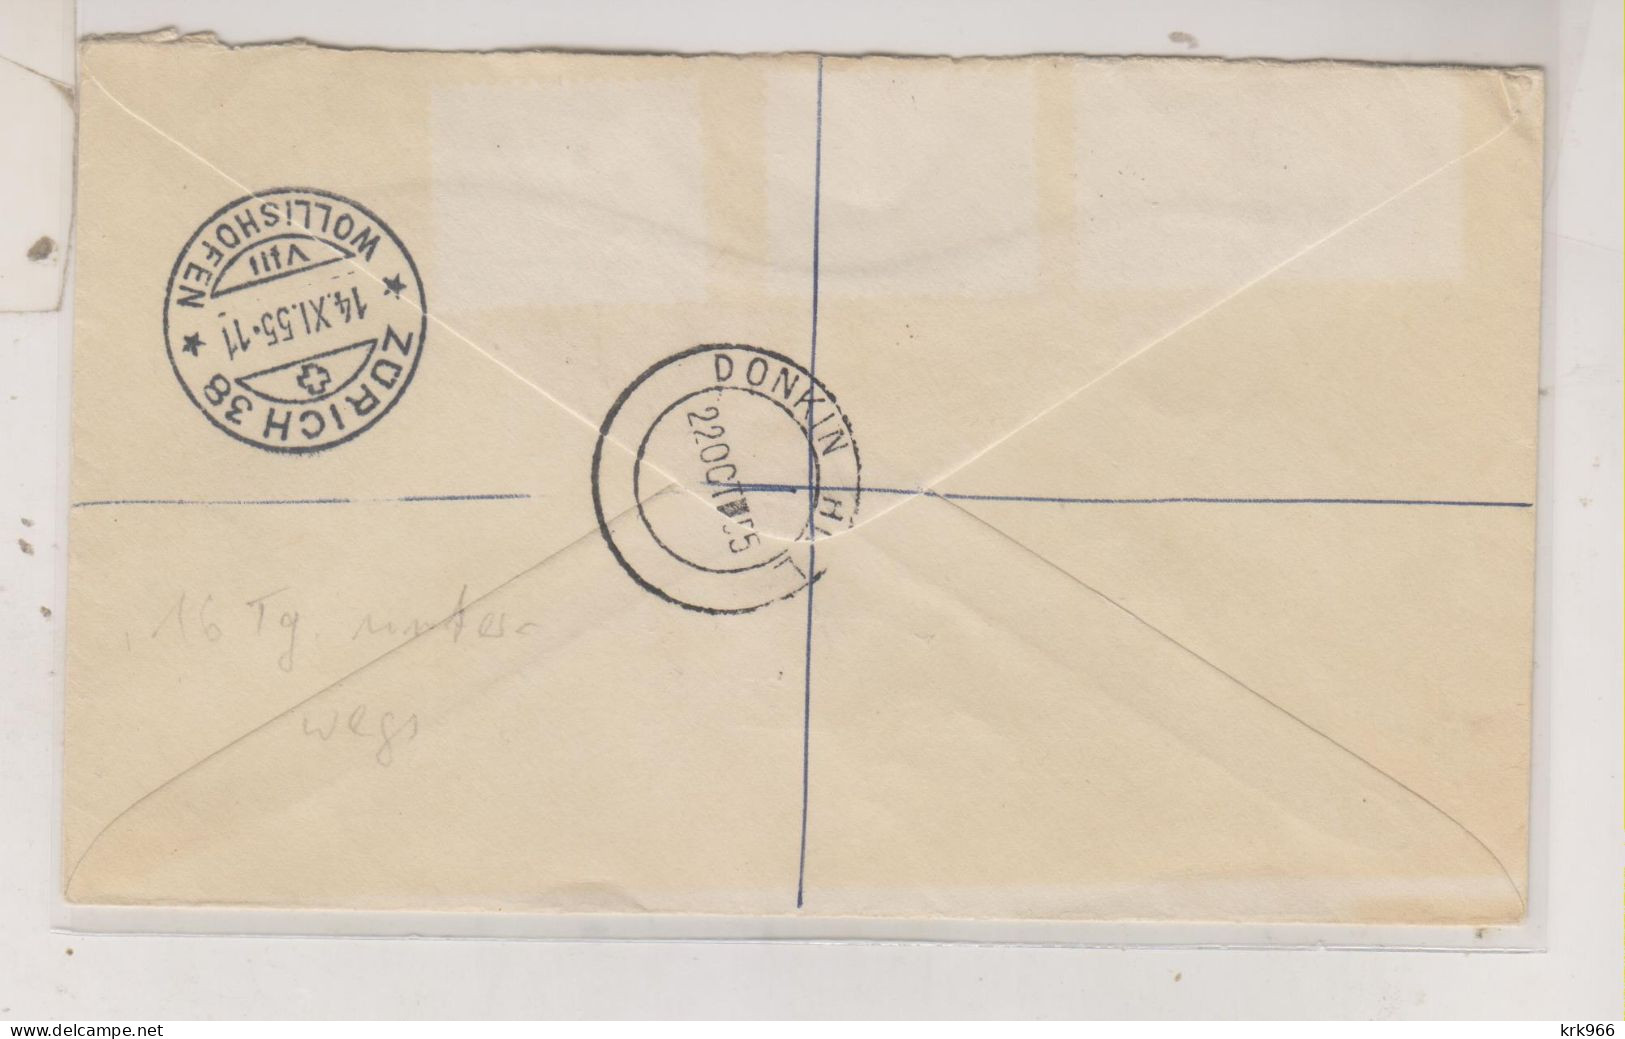 SOUTH AFRICA 1955 DONKIN HILL  Nice Registered FDC Cover To Switzerland - Luchtpost